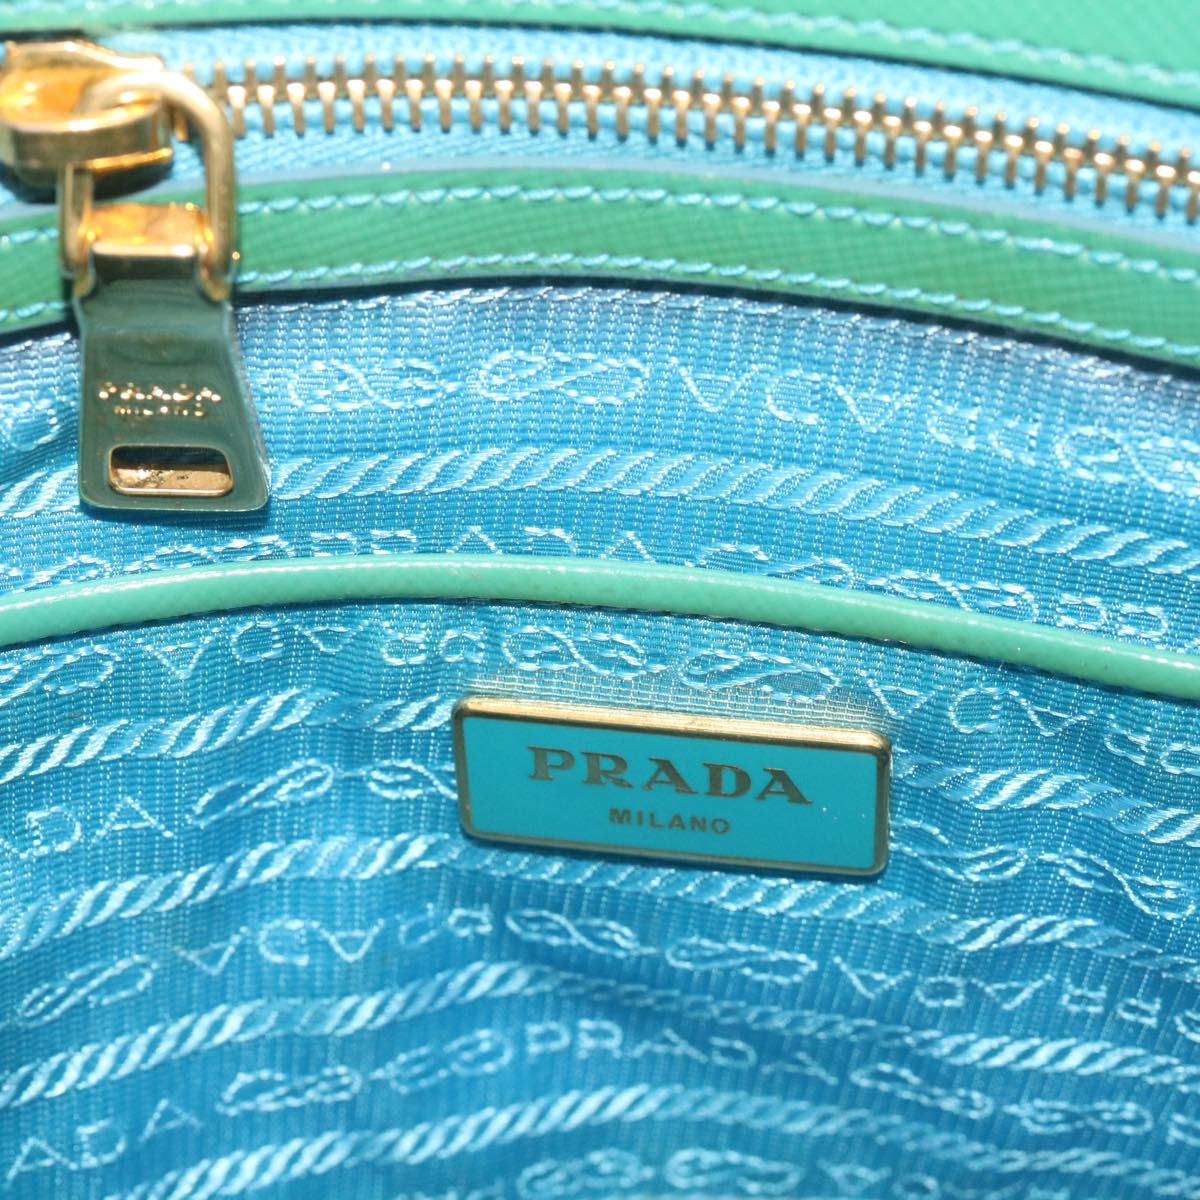 PRADA Hand Bag Leather 2way Turquoise Blue Auth bs12369